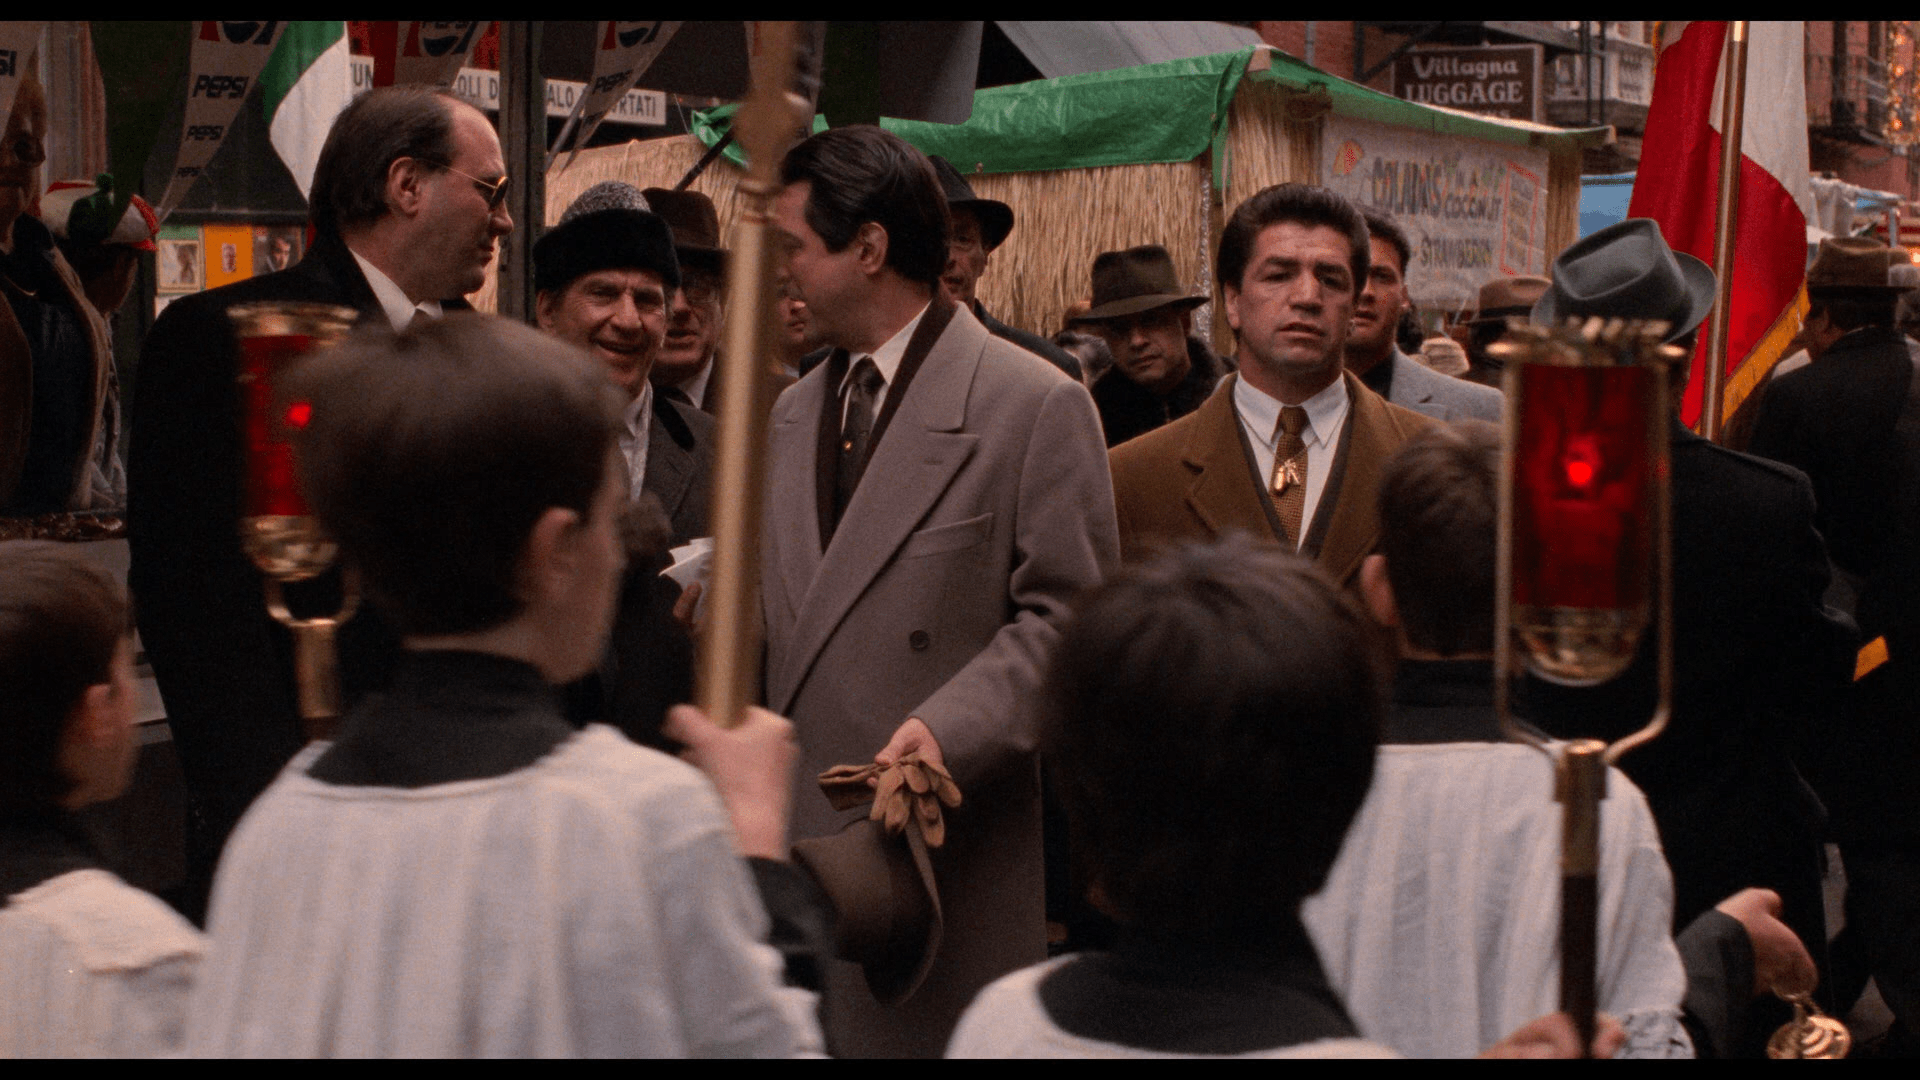 The Godfather Coda: The Death of Michael Corleone (2020) [Blu-ray review] 17